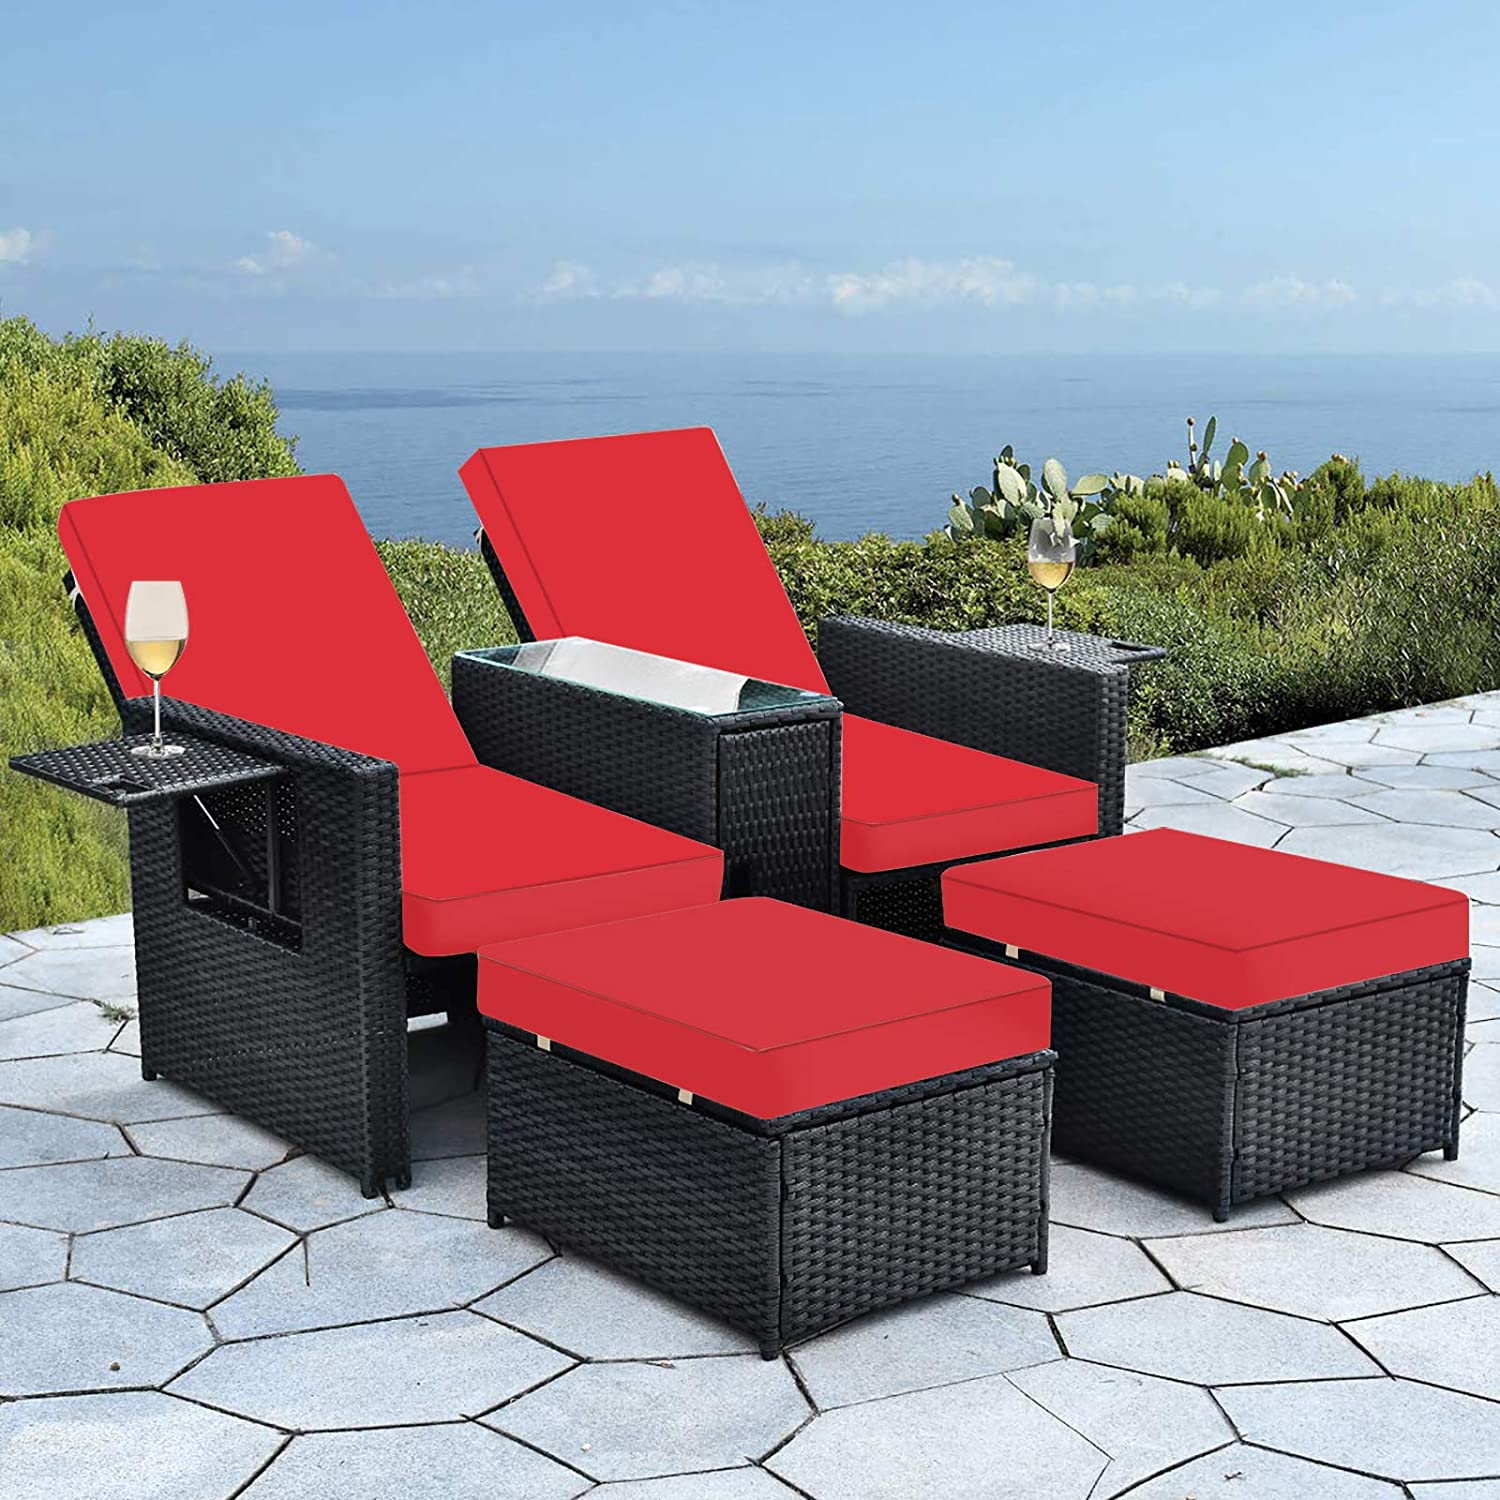 LVUYOYO 5pcs Patio Wicker Loveseat - Outdoor Rattan Sofa Set with Cushion and  Ottoman Footrest, Wicker Furniture for Garden - image 1 of 7